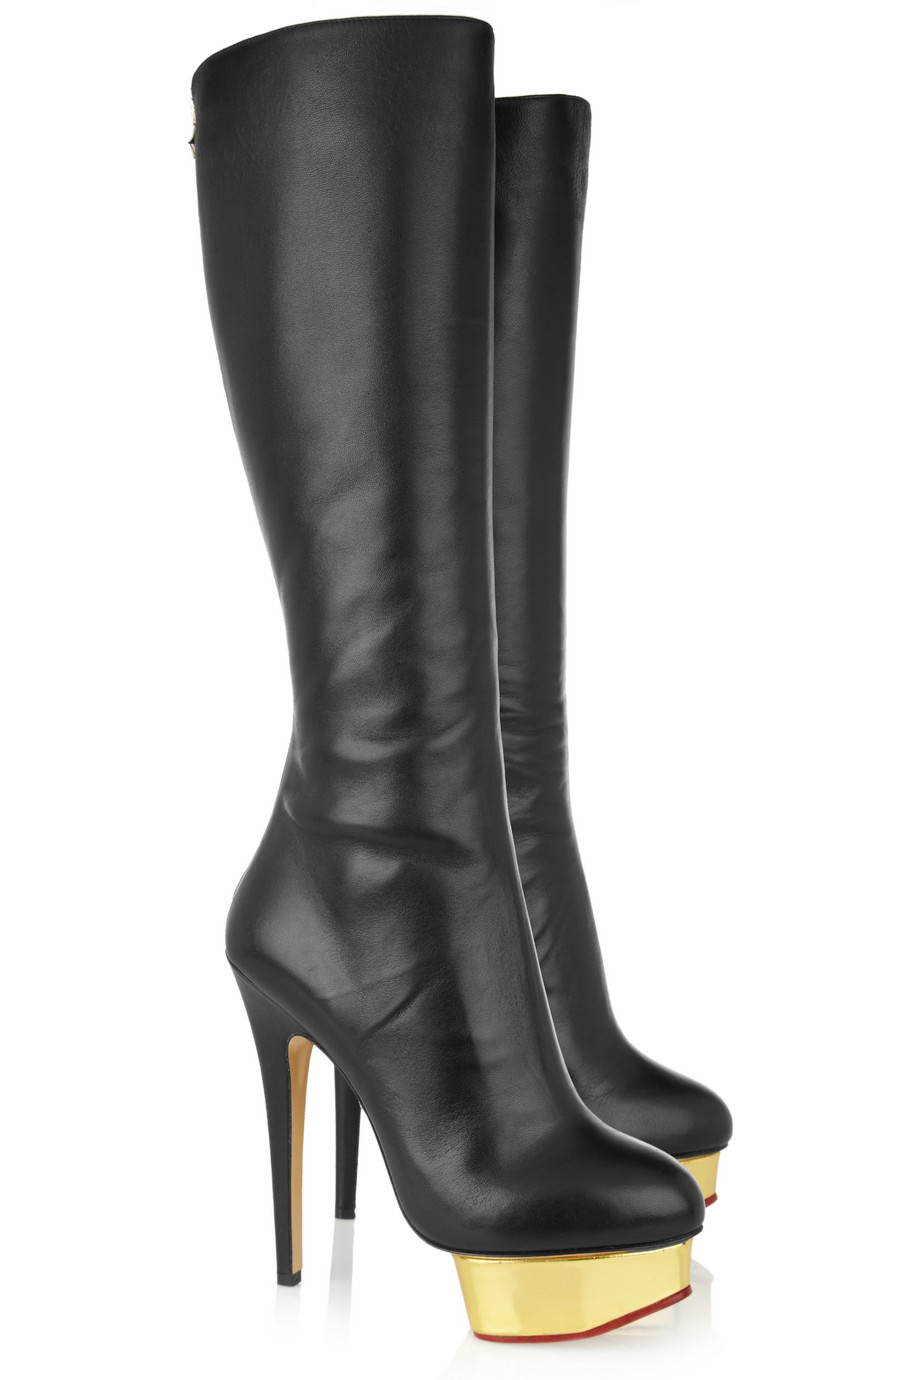 charlotte olympia lucinda boots